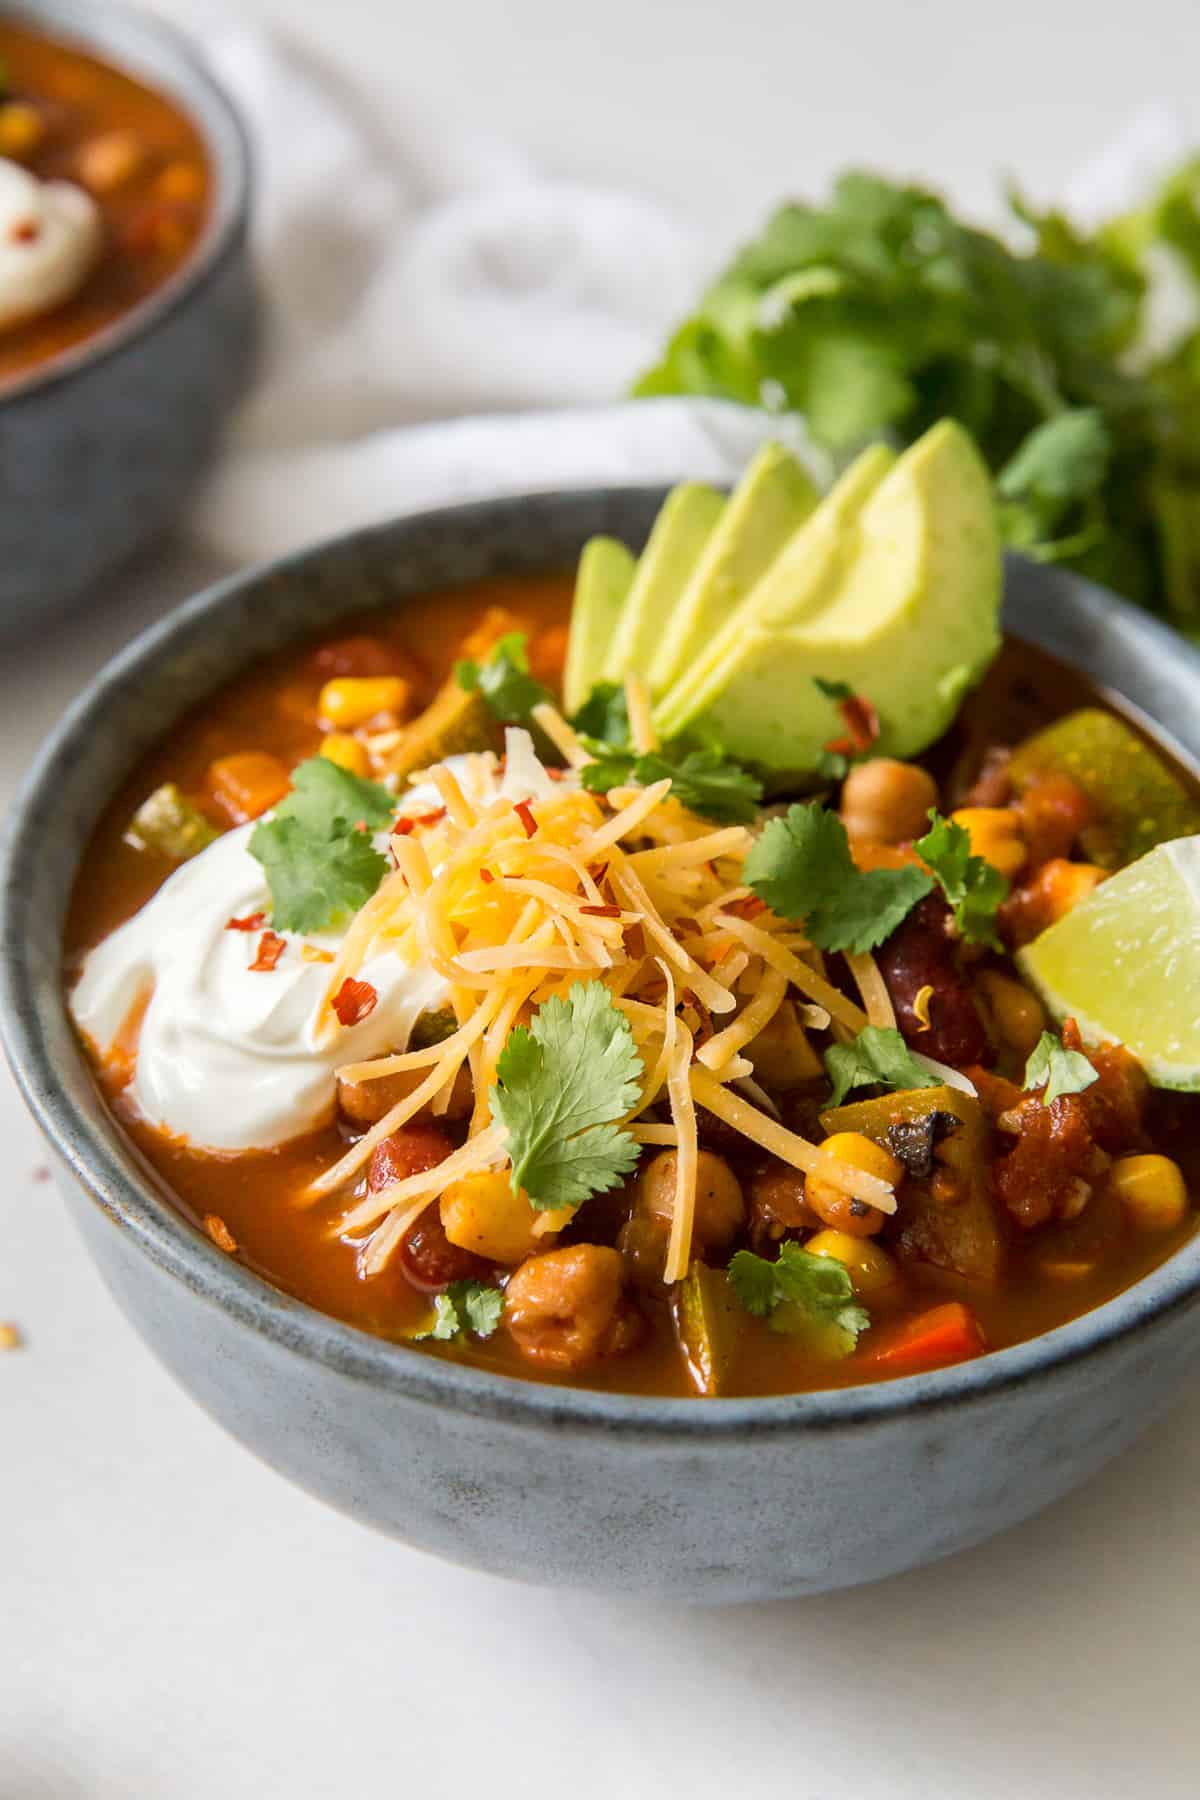 A bowl of chili with veggies topped with avocado, cheese and sour cream.